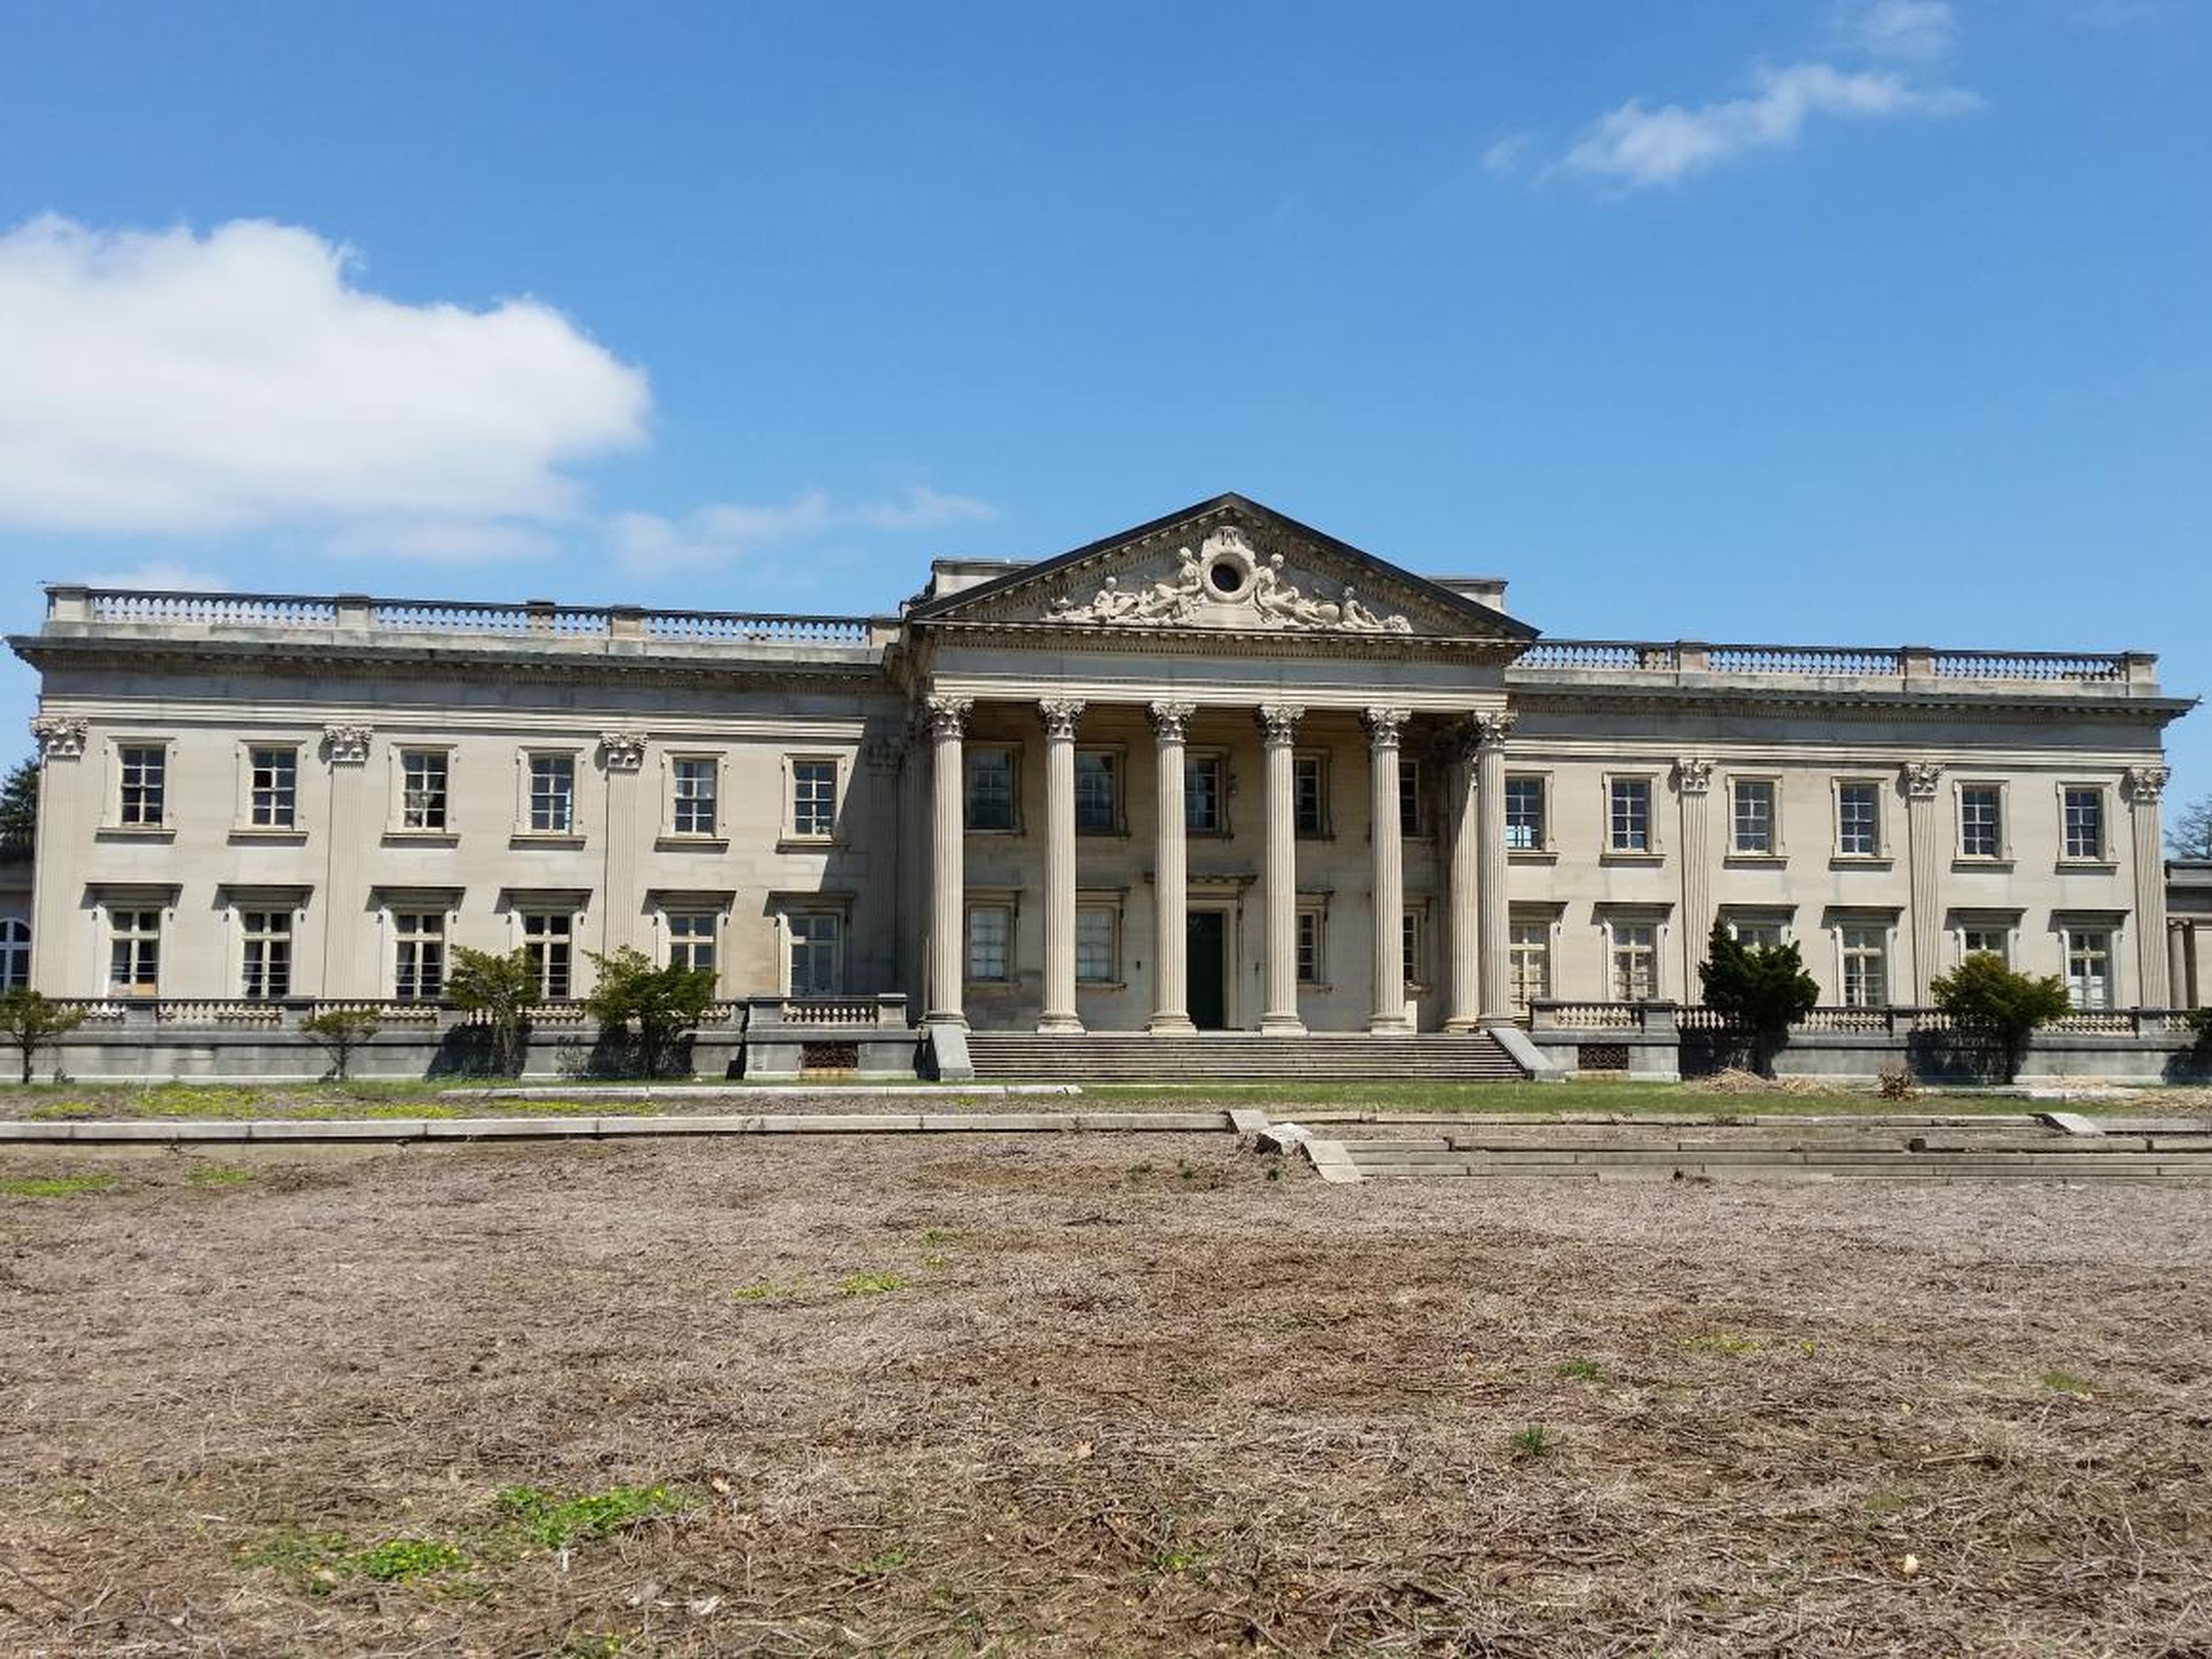 Lynnewood Hall, a 110-room, century-old Gilded Age palace just outside of Philadelphia, was designed by Horace Trumbauer in the late 1890s.